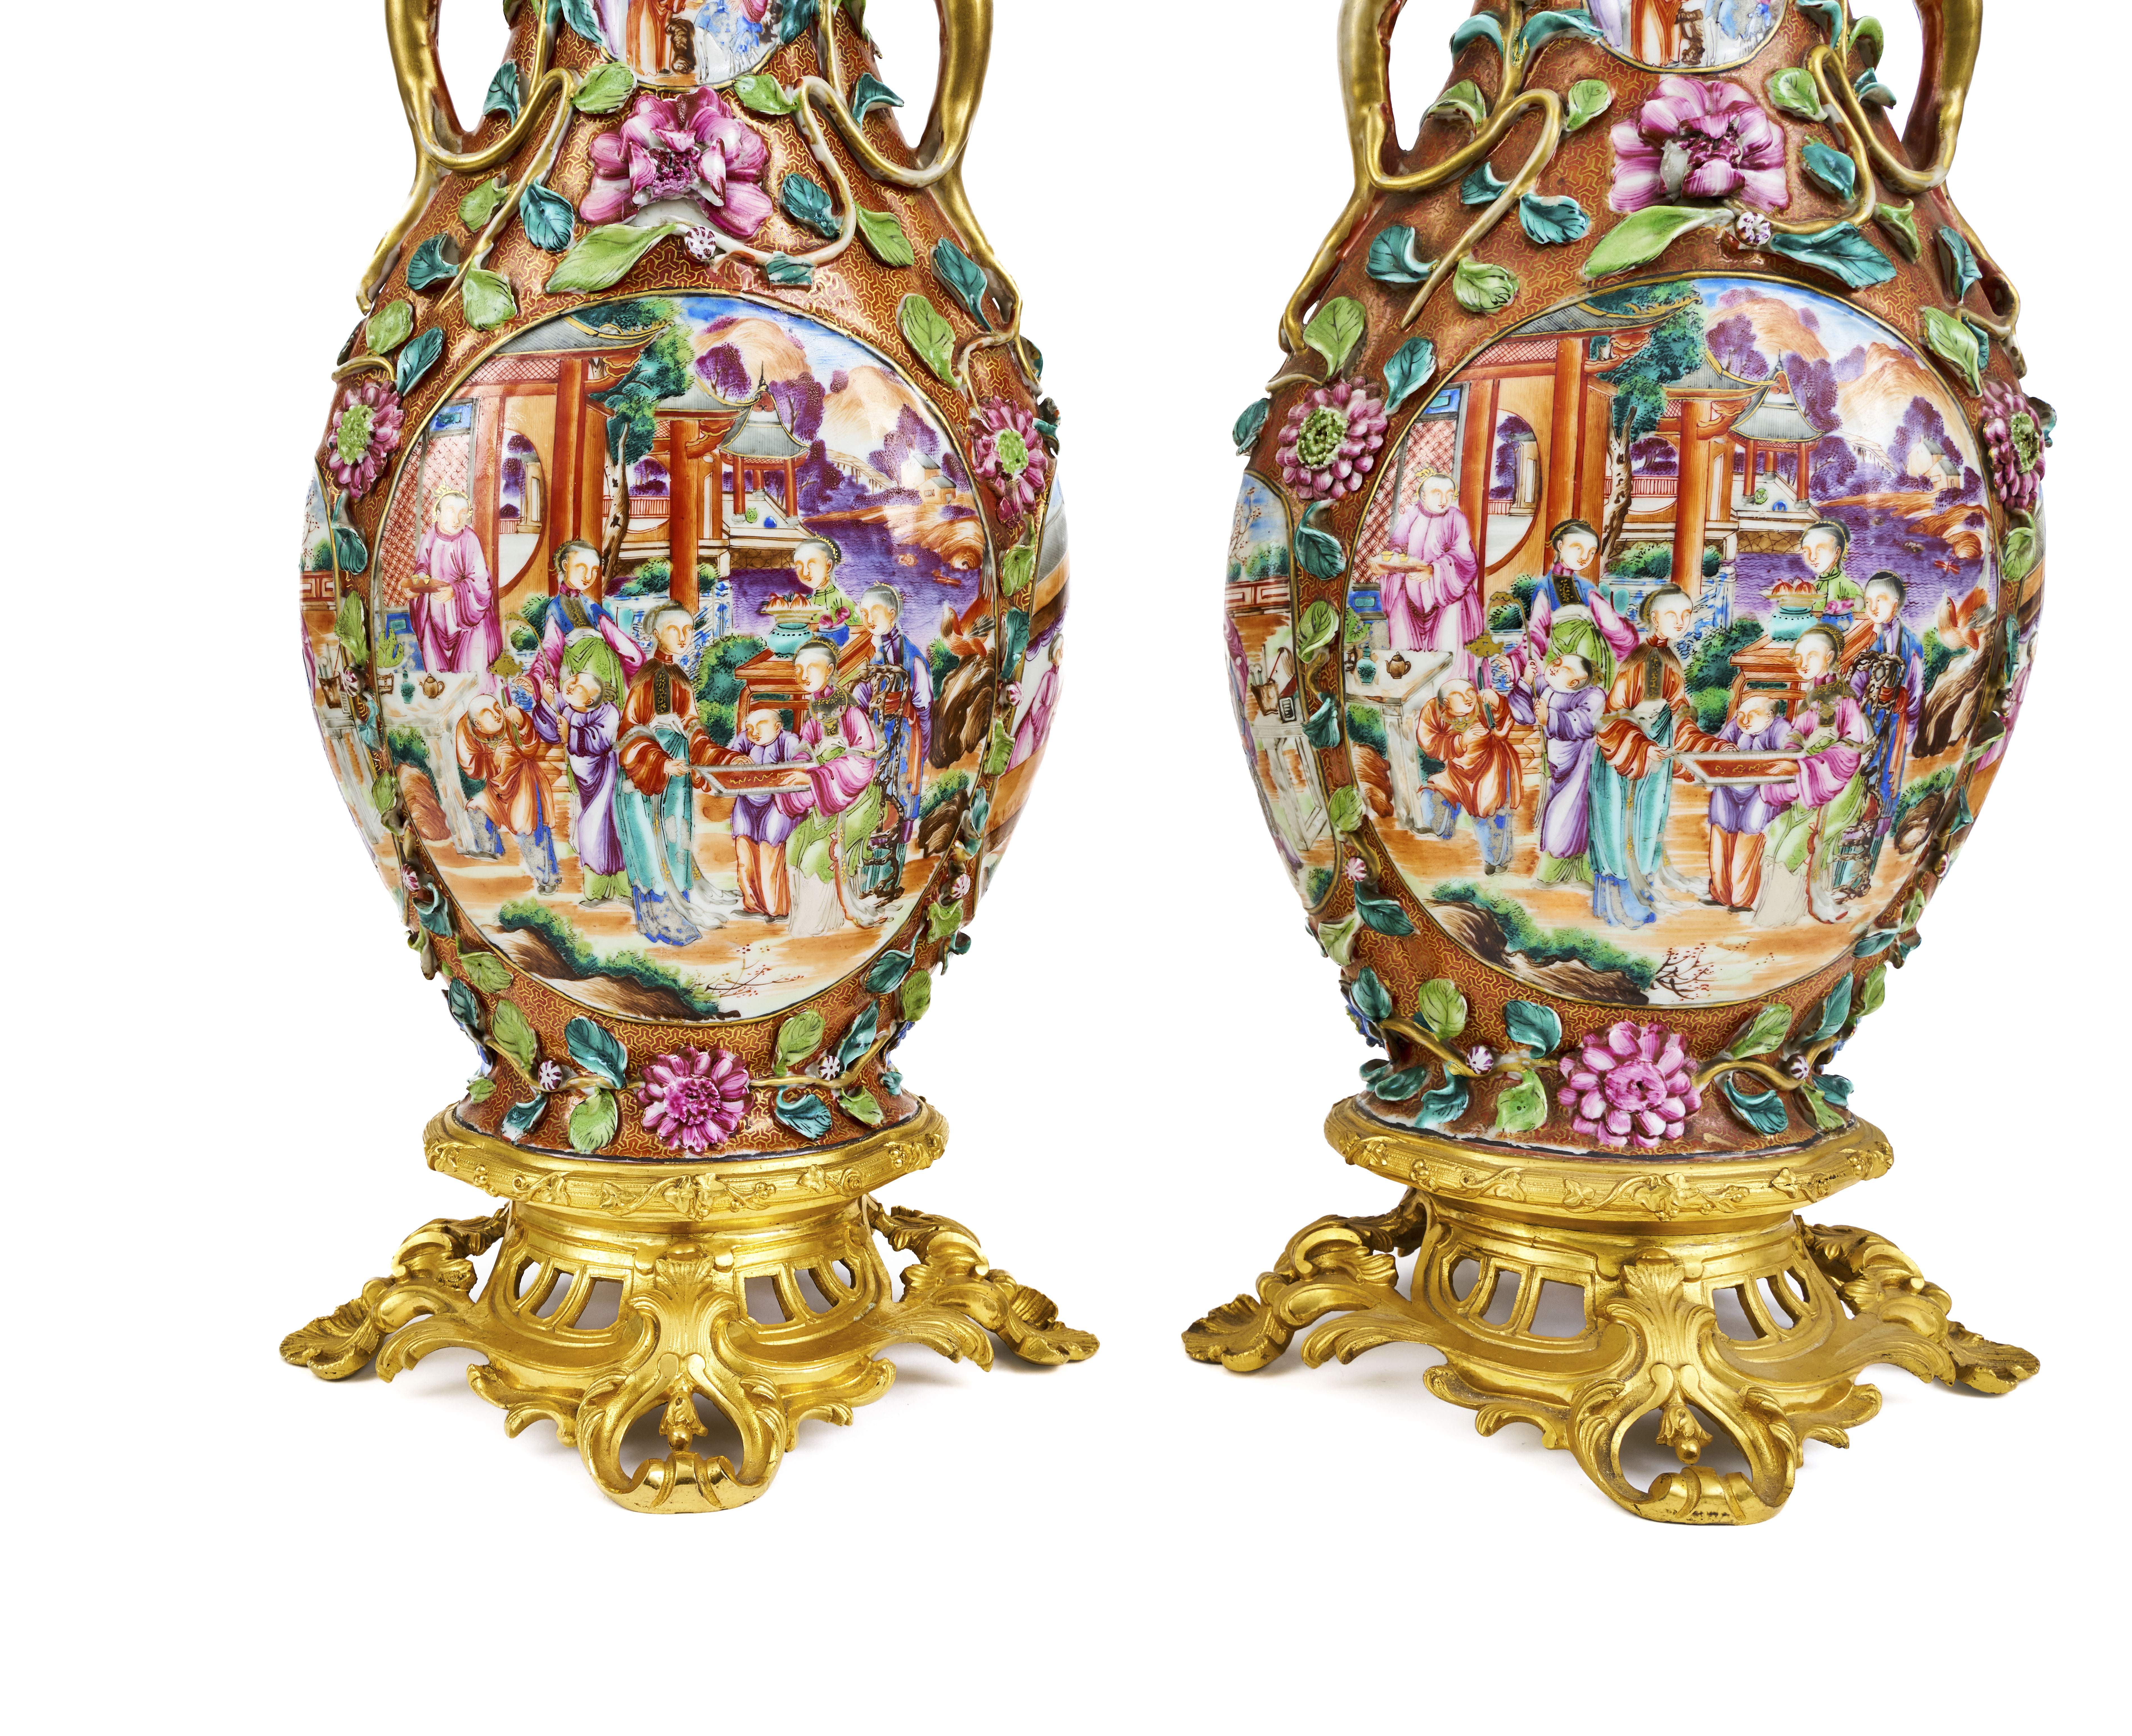 A PAIR OF CHINESE FAMILLE ROSE VASES WITH FRENCH MOUNTS, QIANLONG PERIOD (1736-1795) - Image 3 of 5